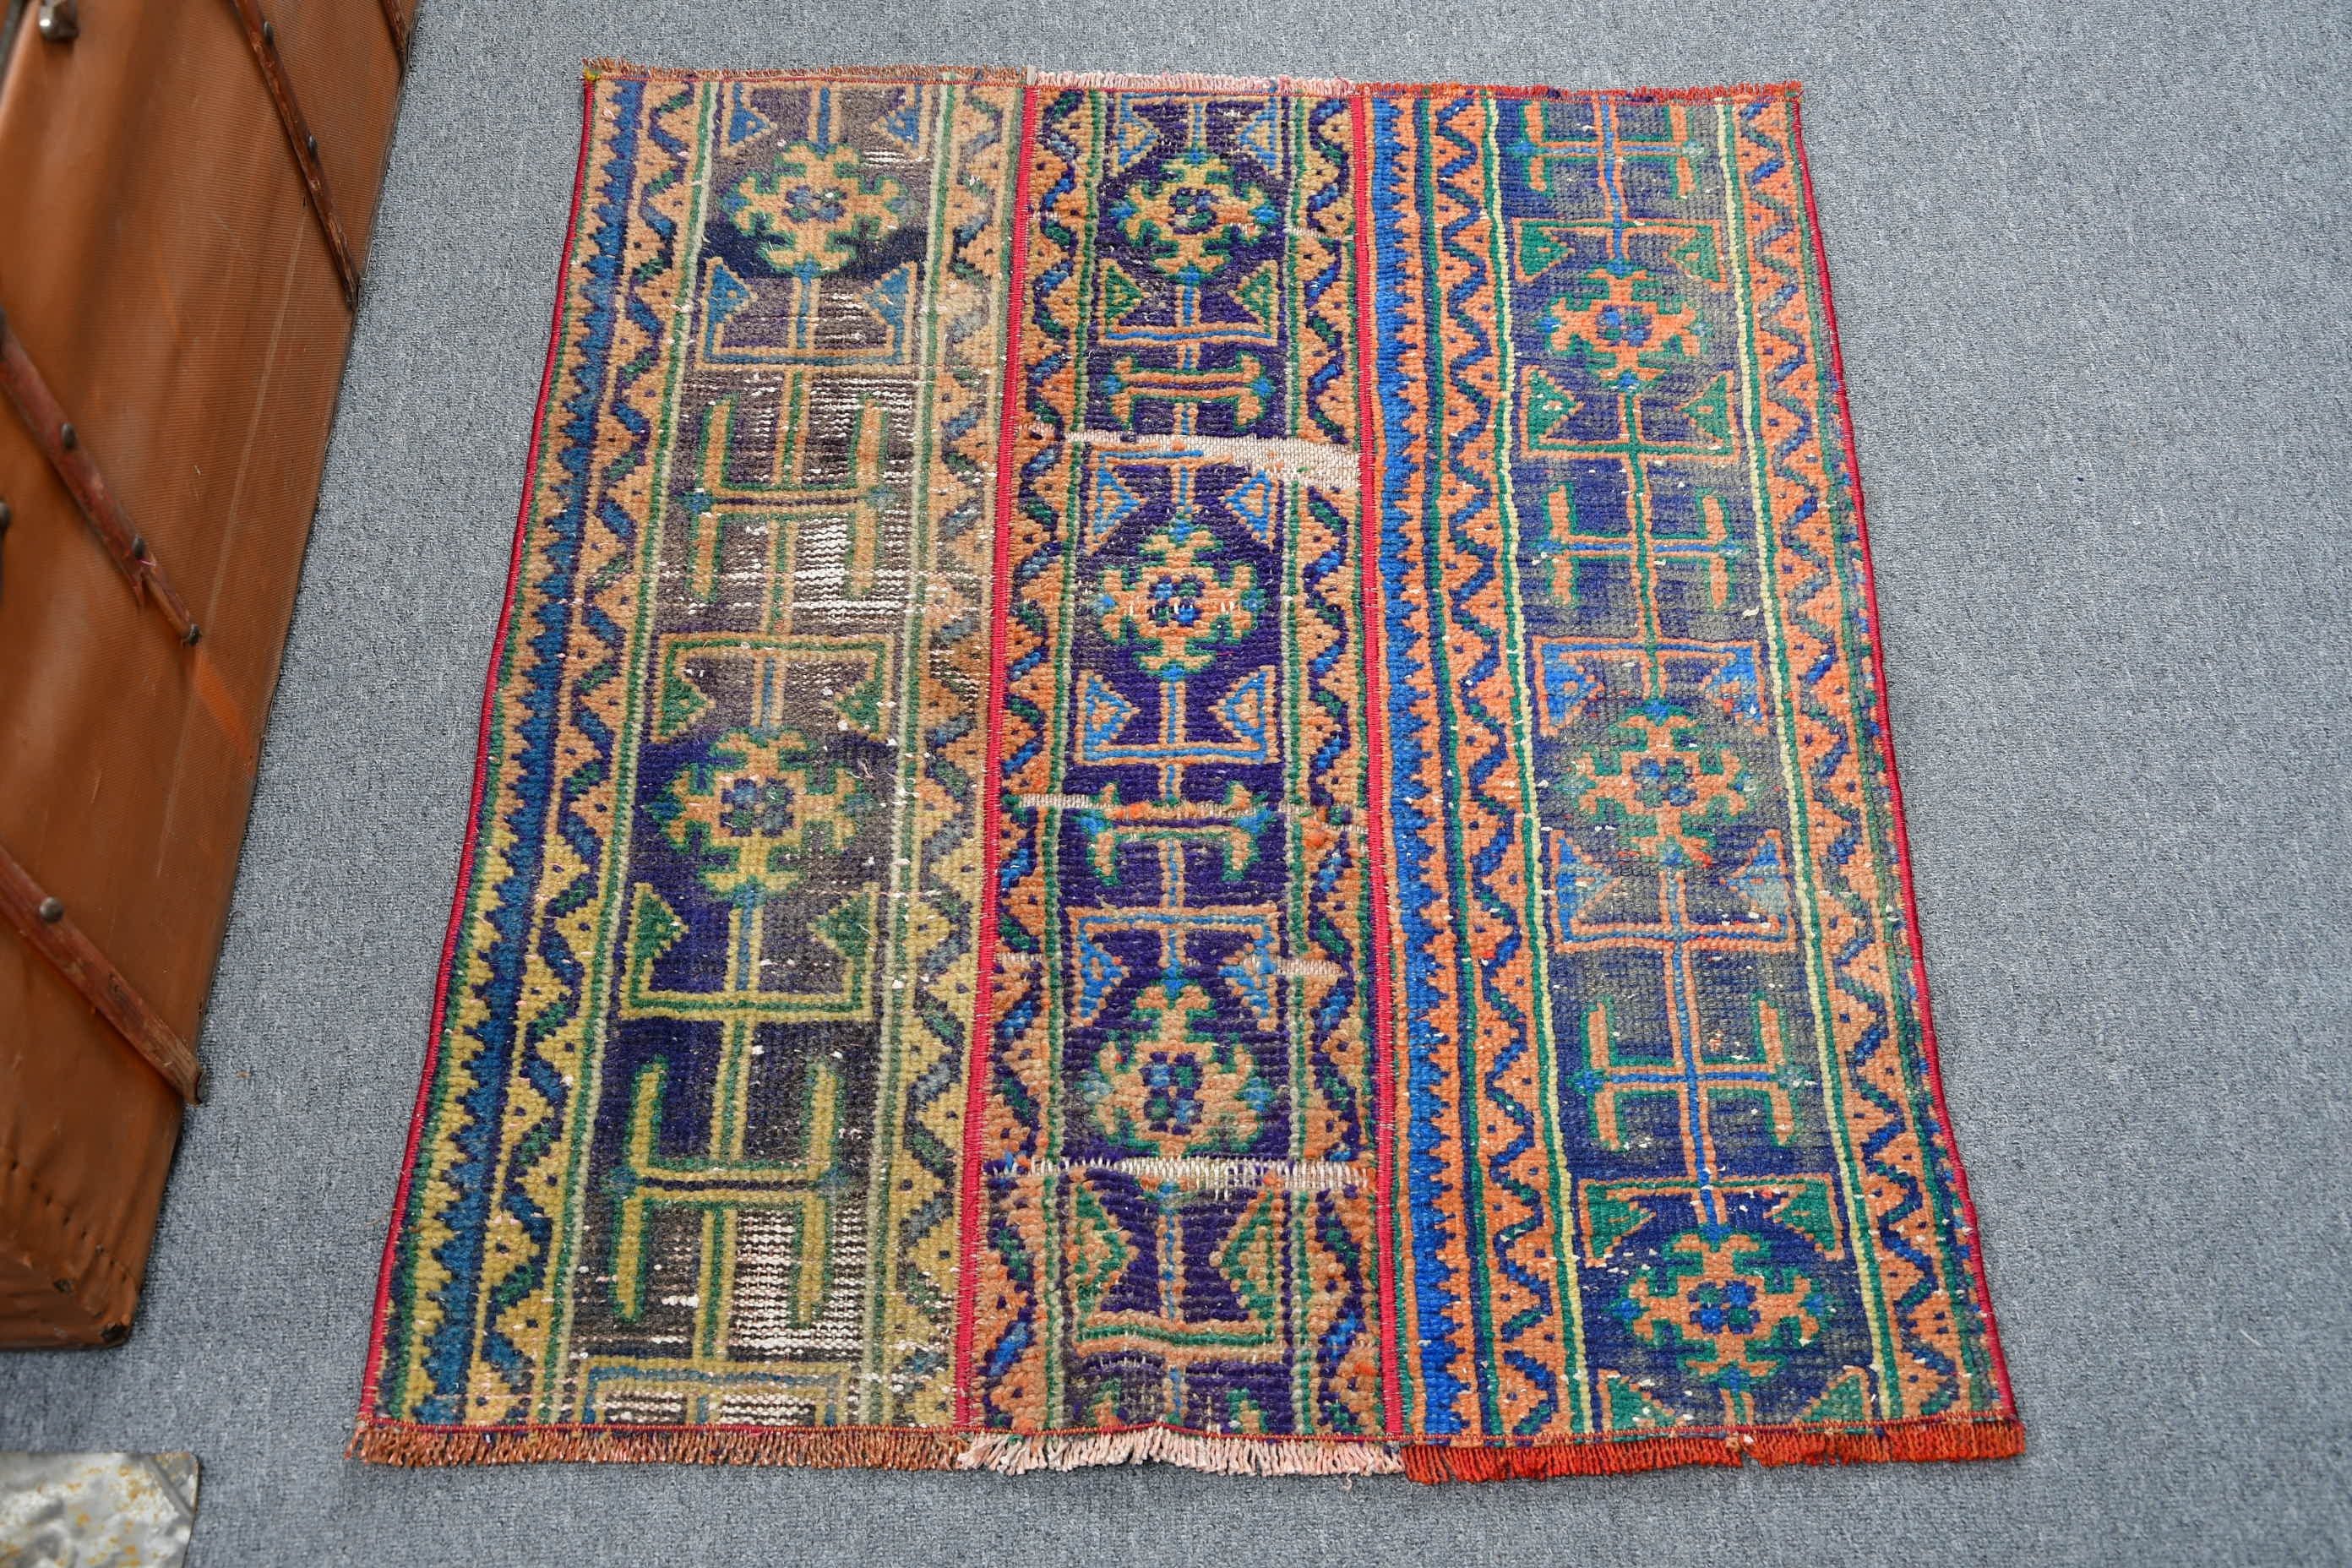 Antique Rugs, Kitchen Rugs, 2.6x2.9 ft Small Rug, Rugs for Entry, Turkish Rug, Blue Floor Rug, Car Mat Rug, Vintage Rug